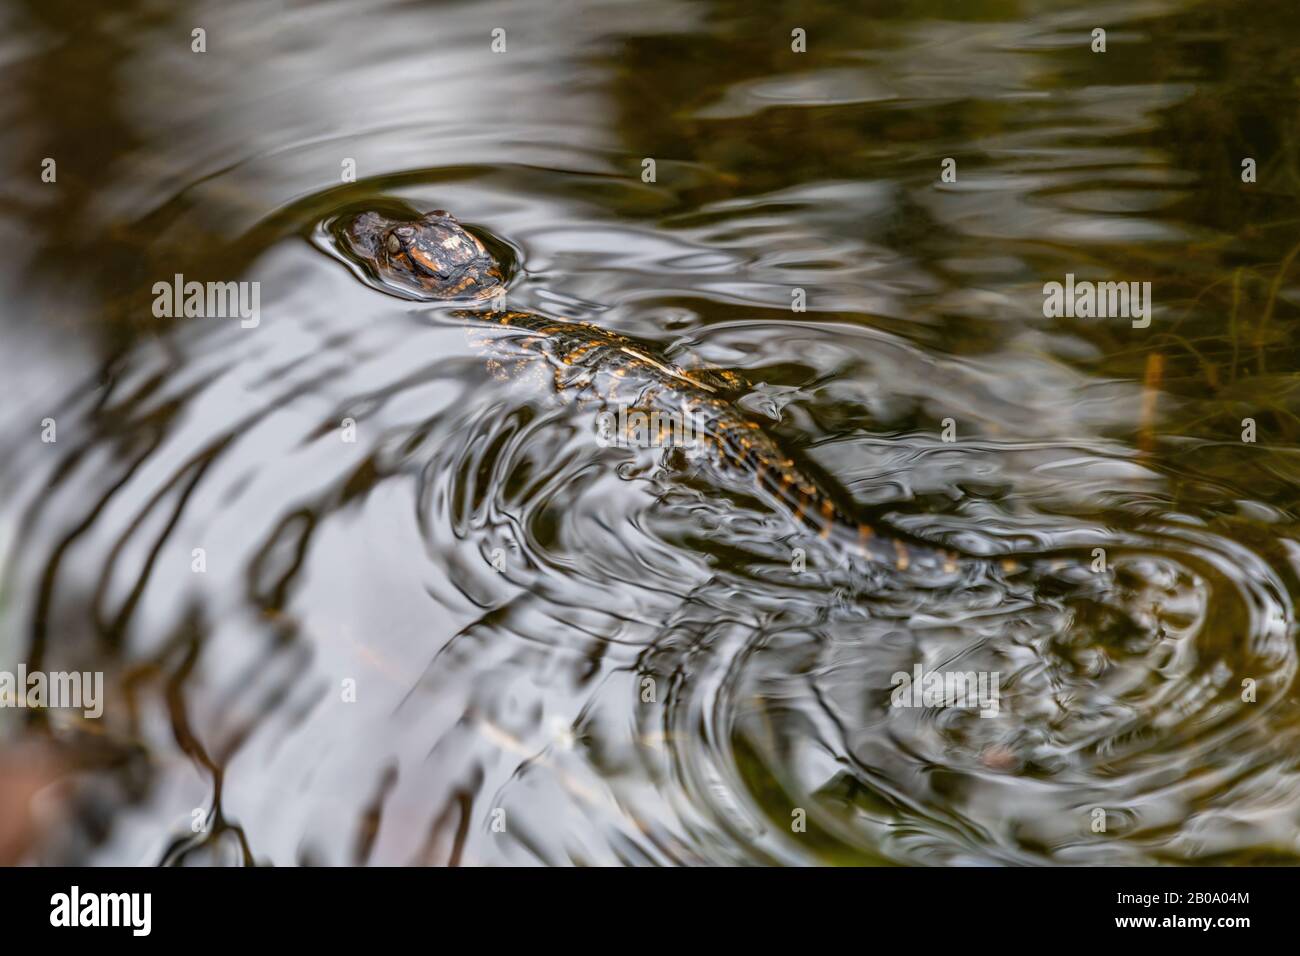 Close up of a young American alligator (Alligator mississippiensis) hatchling swimming on the water in Florida, USA. Stock Photo